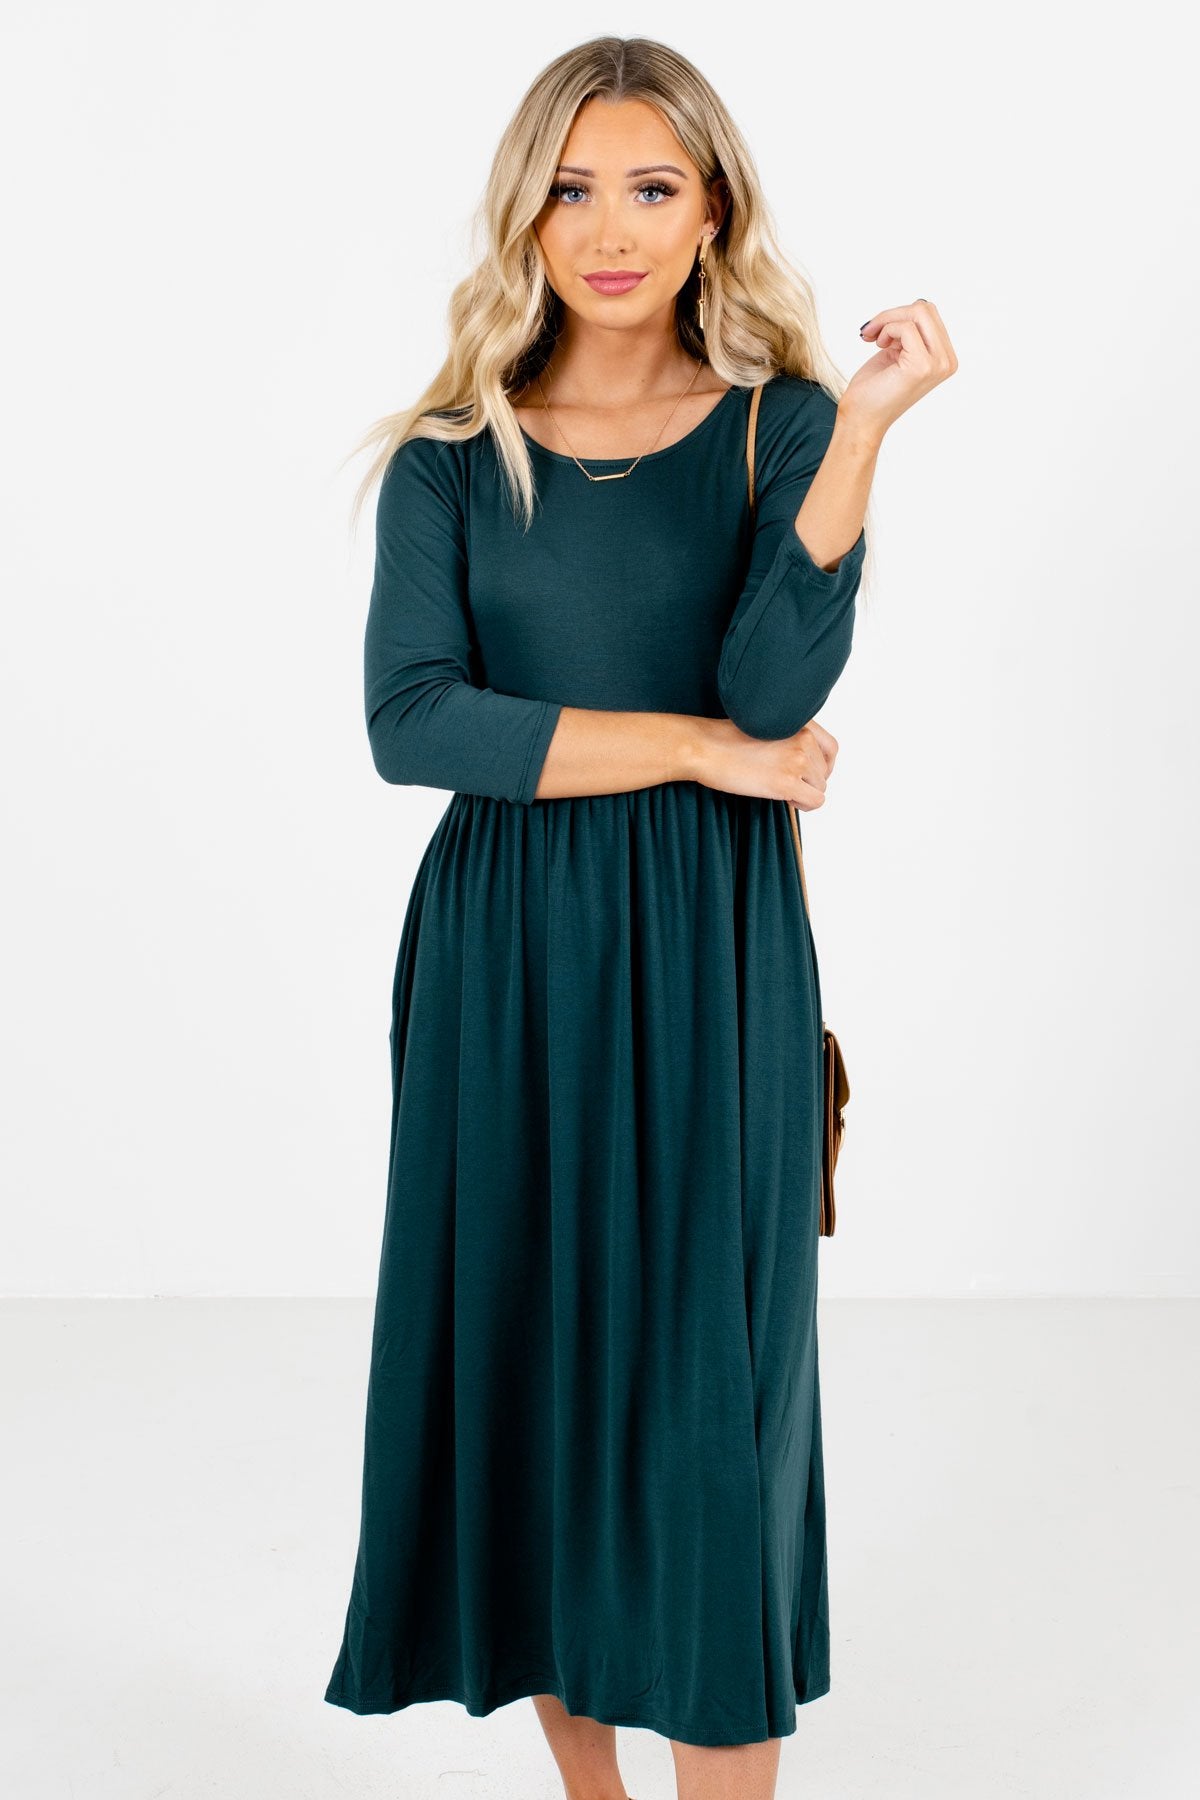 Women’s Teal Green High-Quality Material Boutique Midi Dress